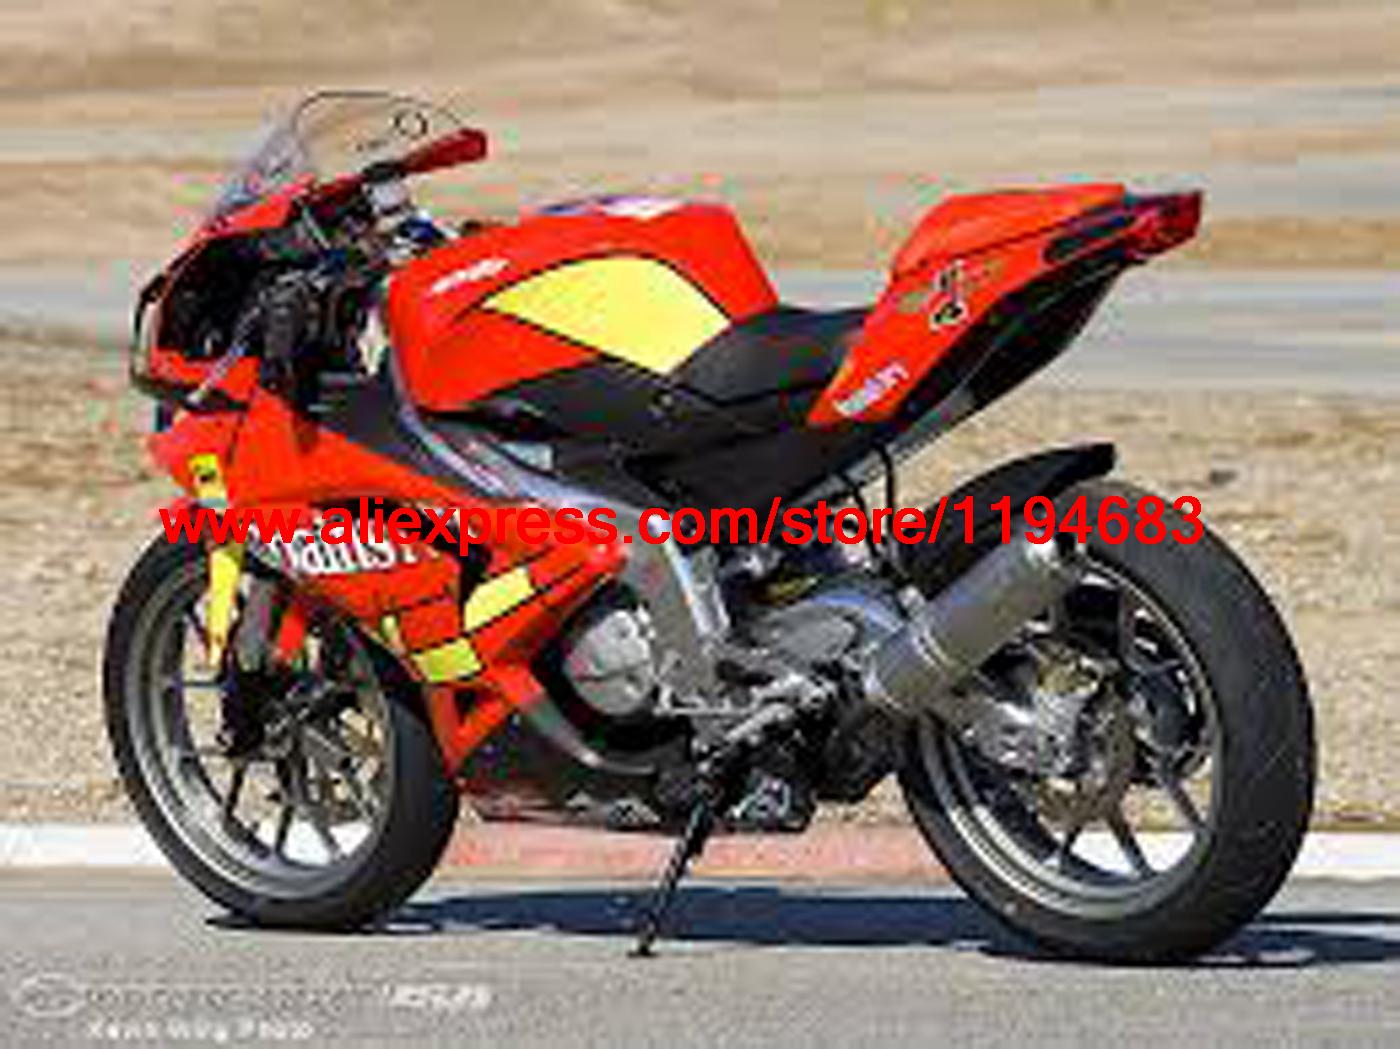 Rs 125 02 03   02 03 RS 125  00-05